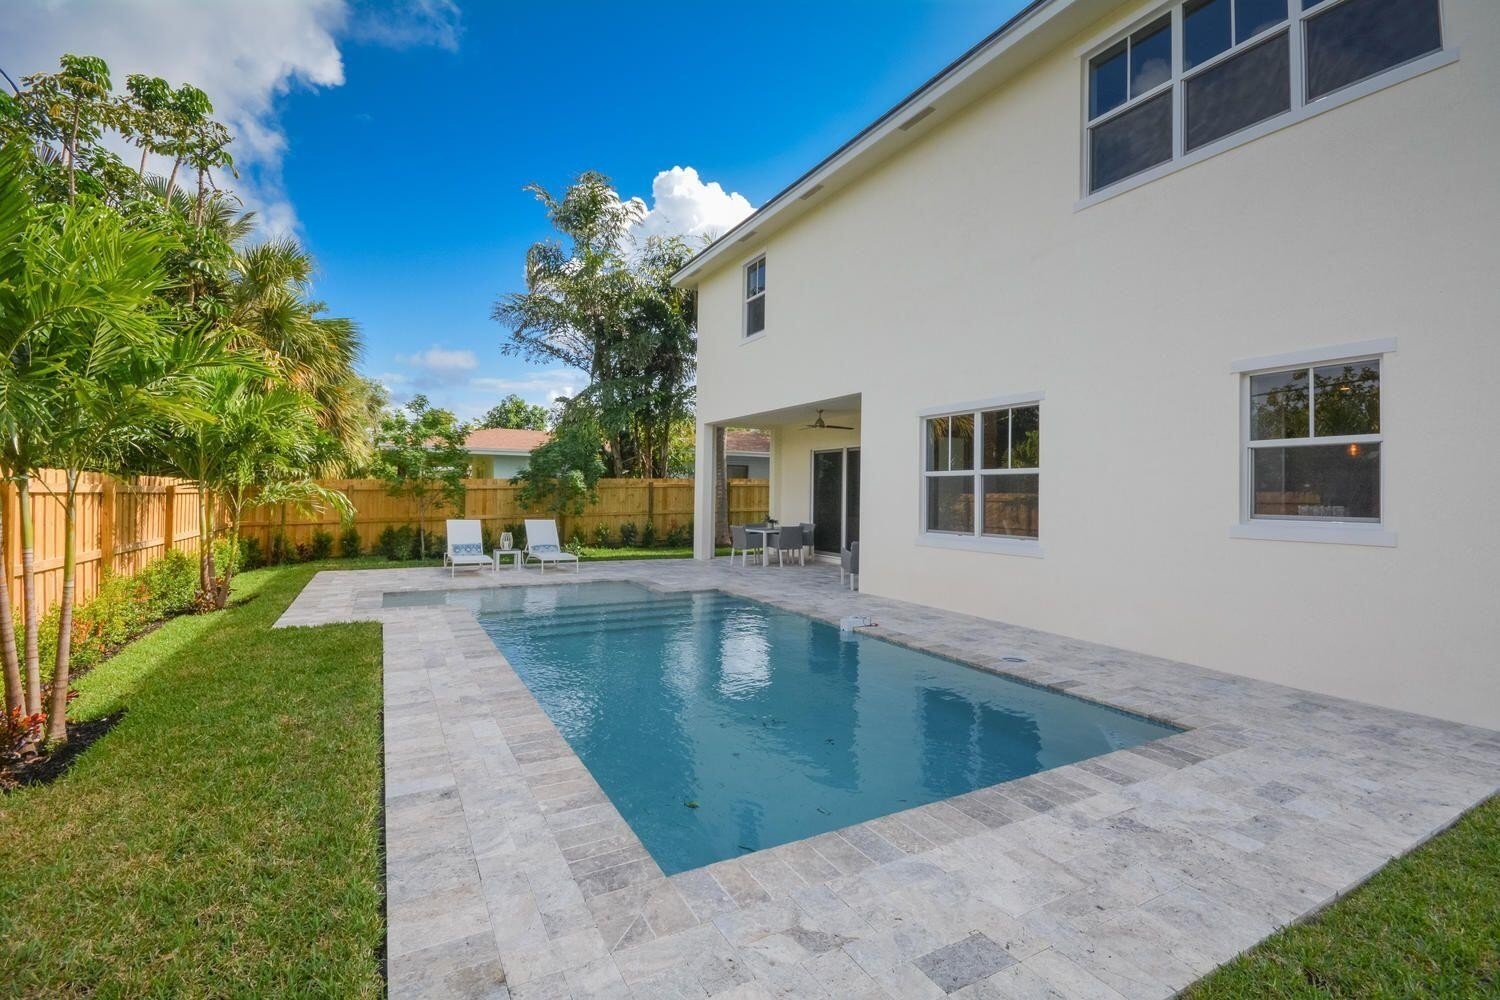 29. Single Family Homes for Sale at Delray Manors, Boca Raton, FL 33487